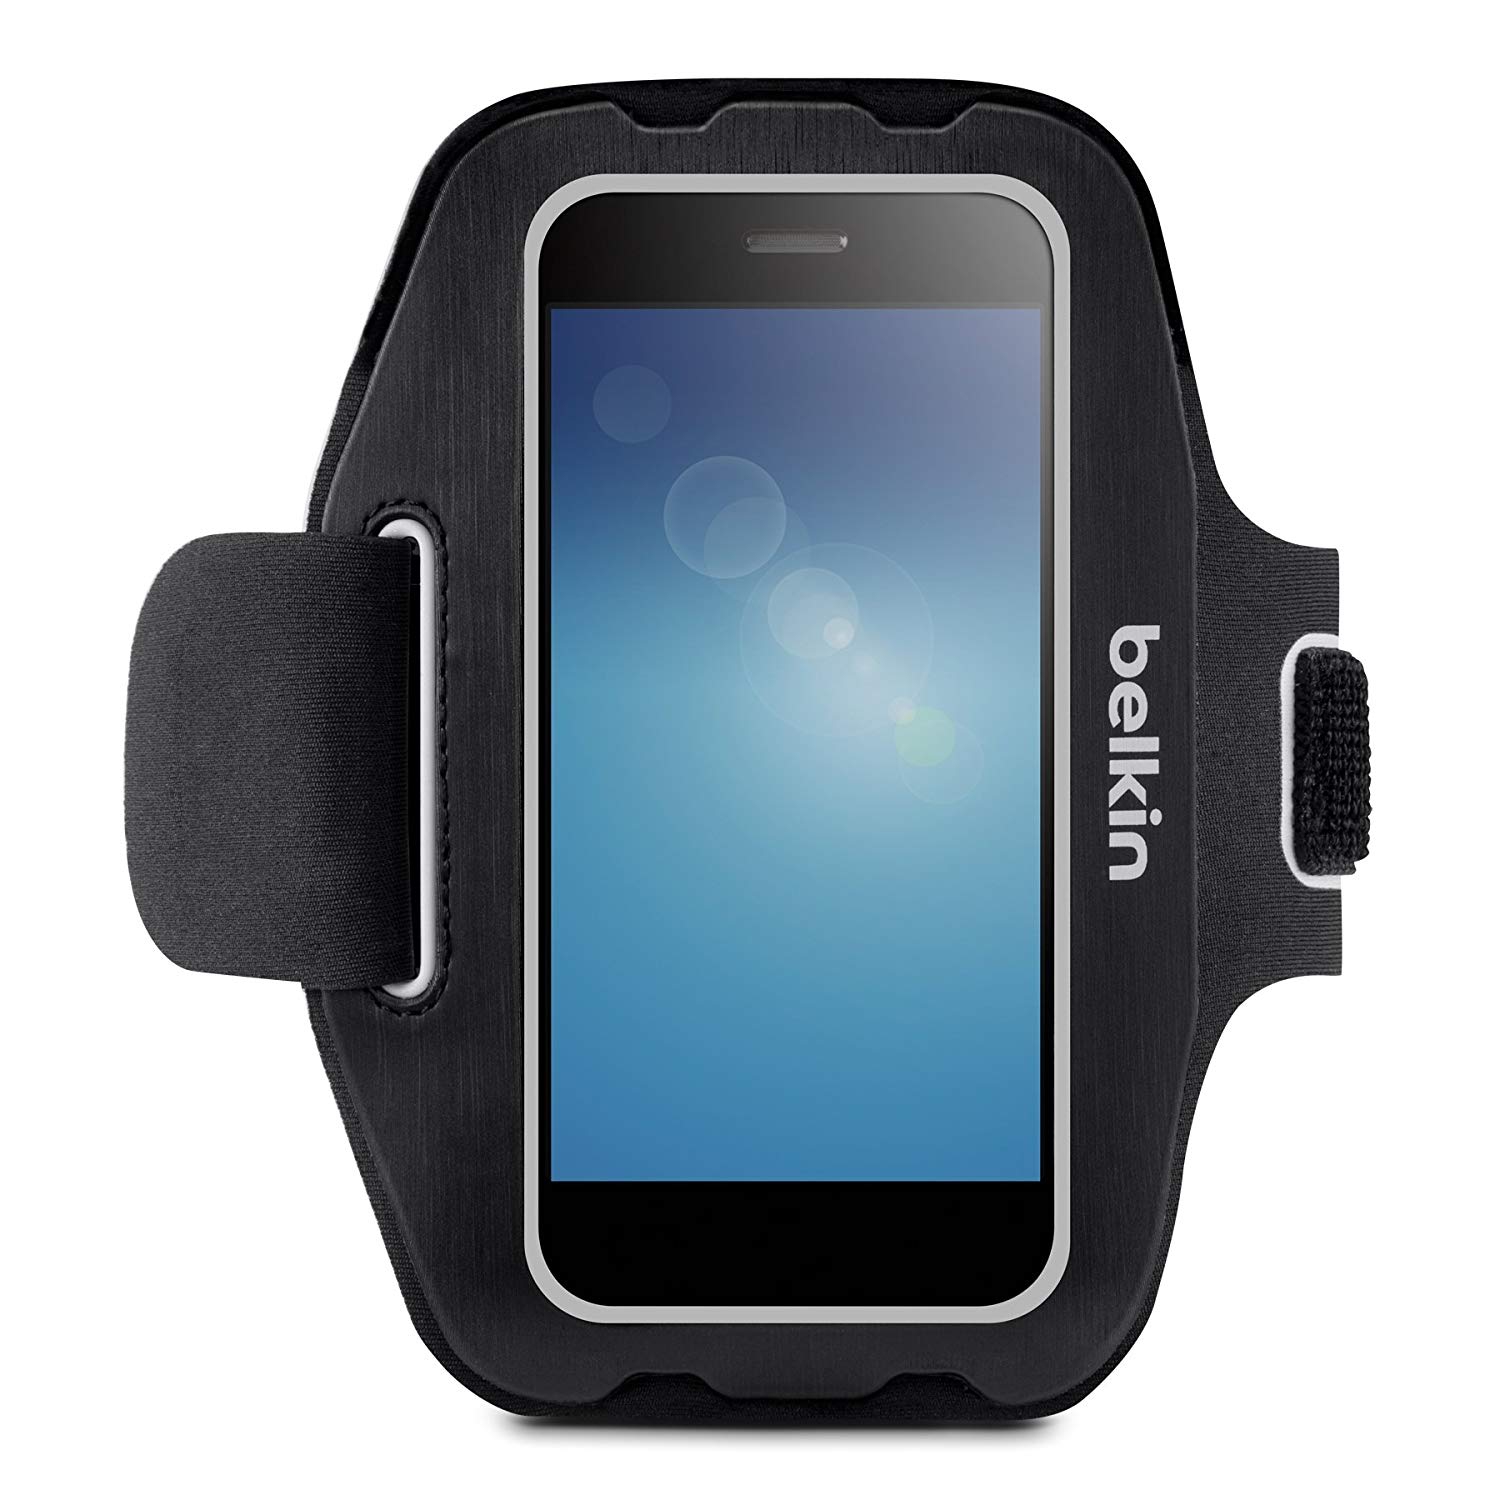 Belkin Sport-Fit Plus Carrying Case (Armband) for iPhone 6 - Blacktop, Overcast